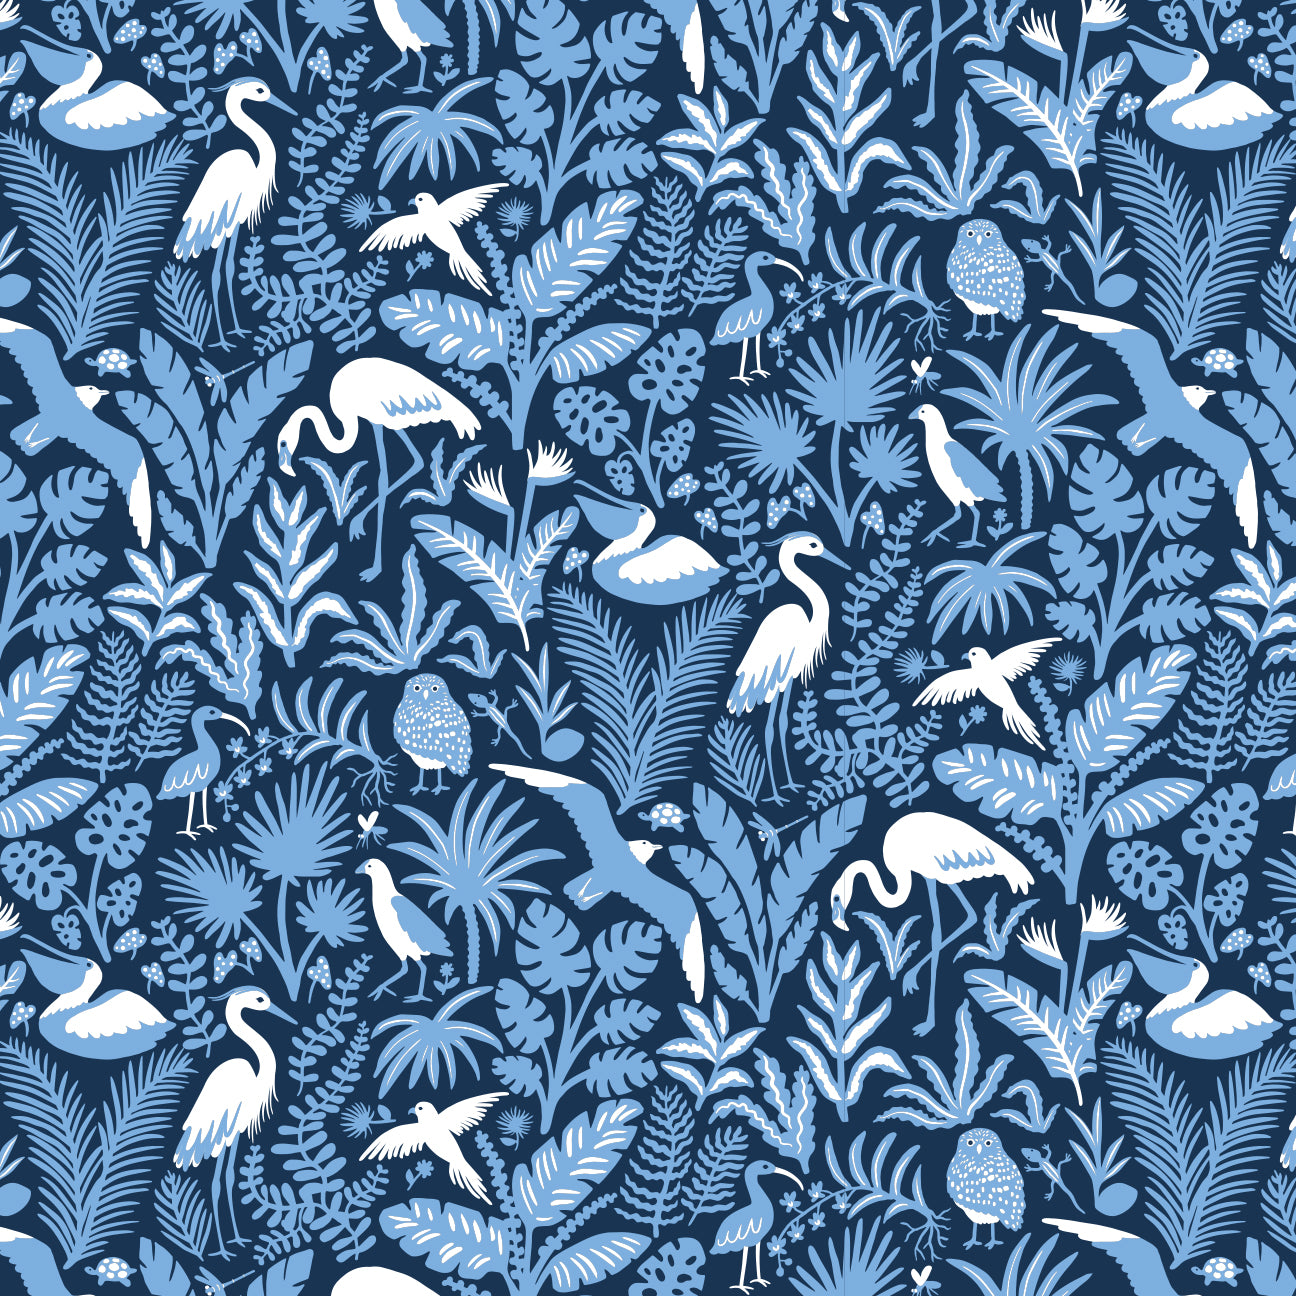 Short-Sleeve Snapsuit - Tropical Birds Navy